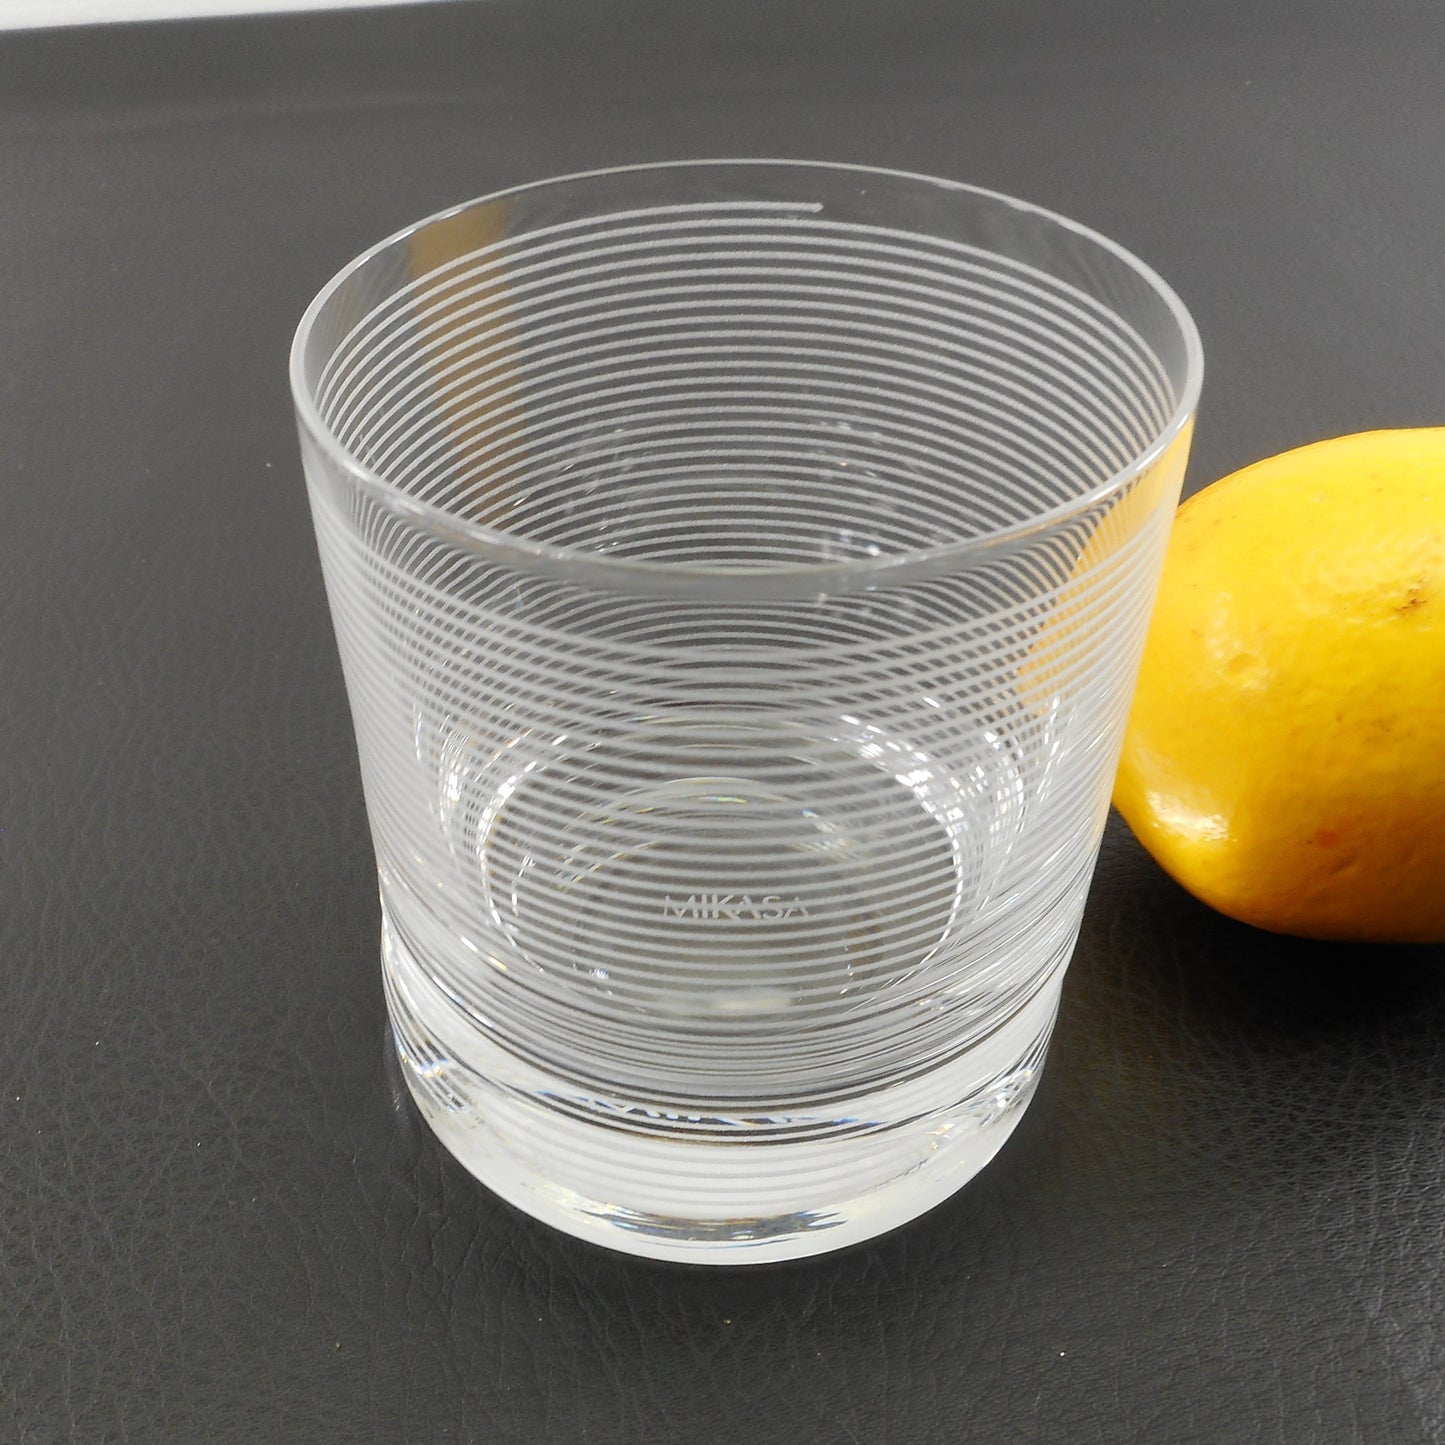 Mikasa Cheers Low Ball Old Fashioned Glass - Horizontal Lines